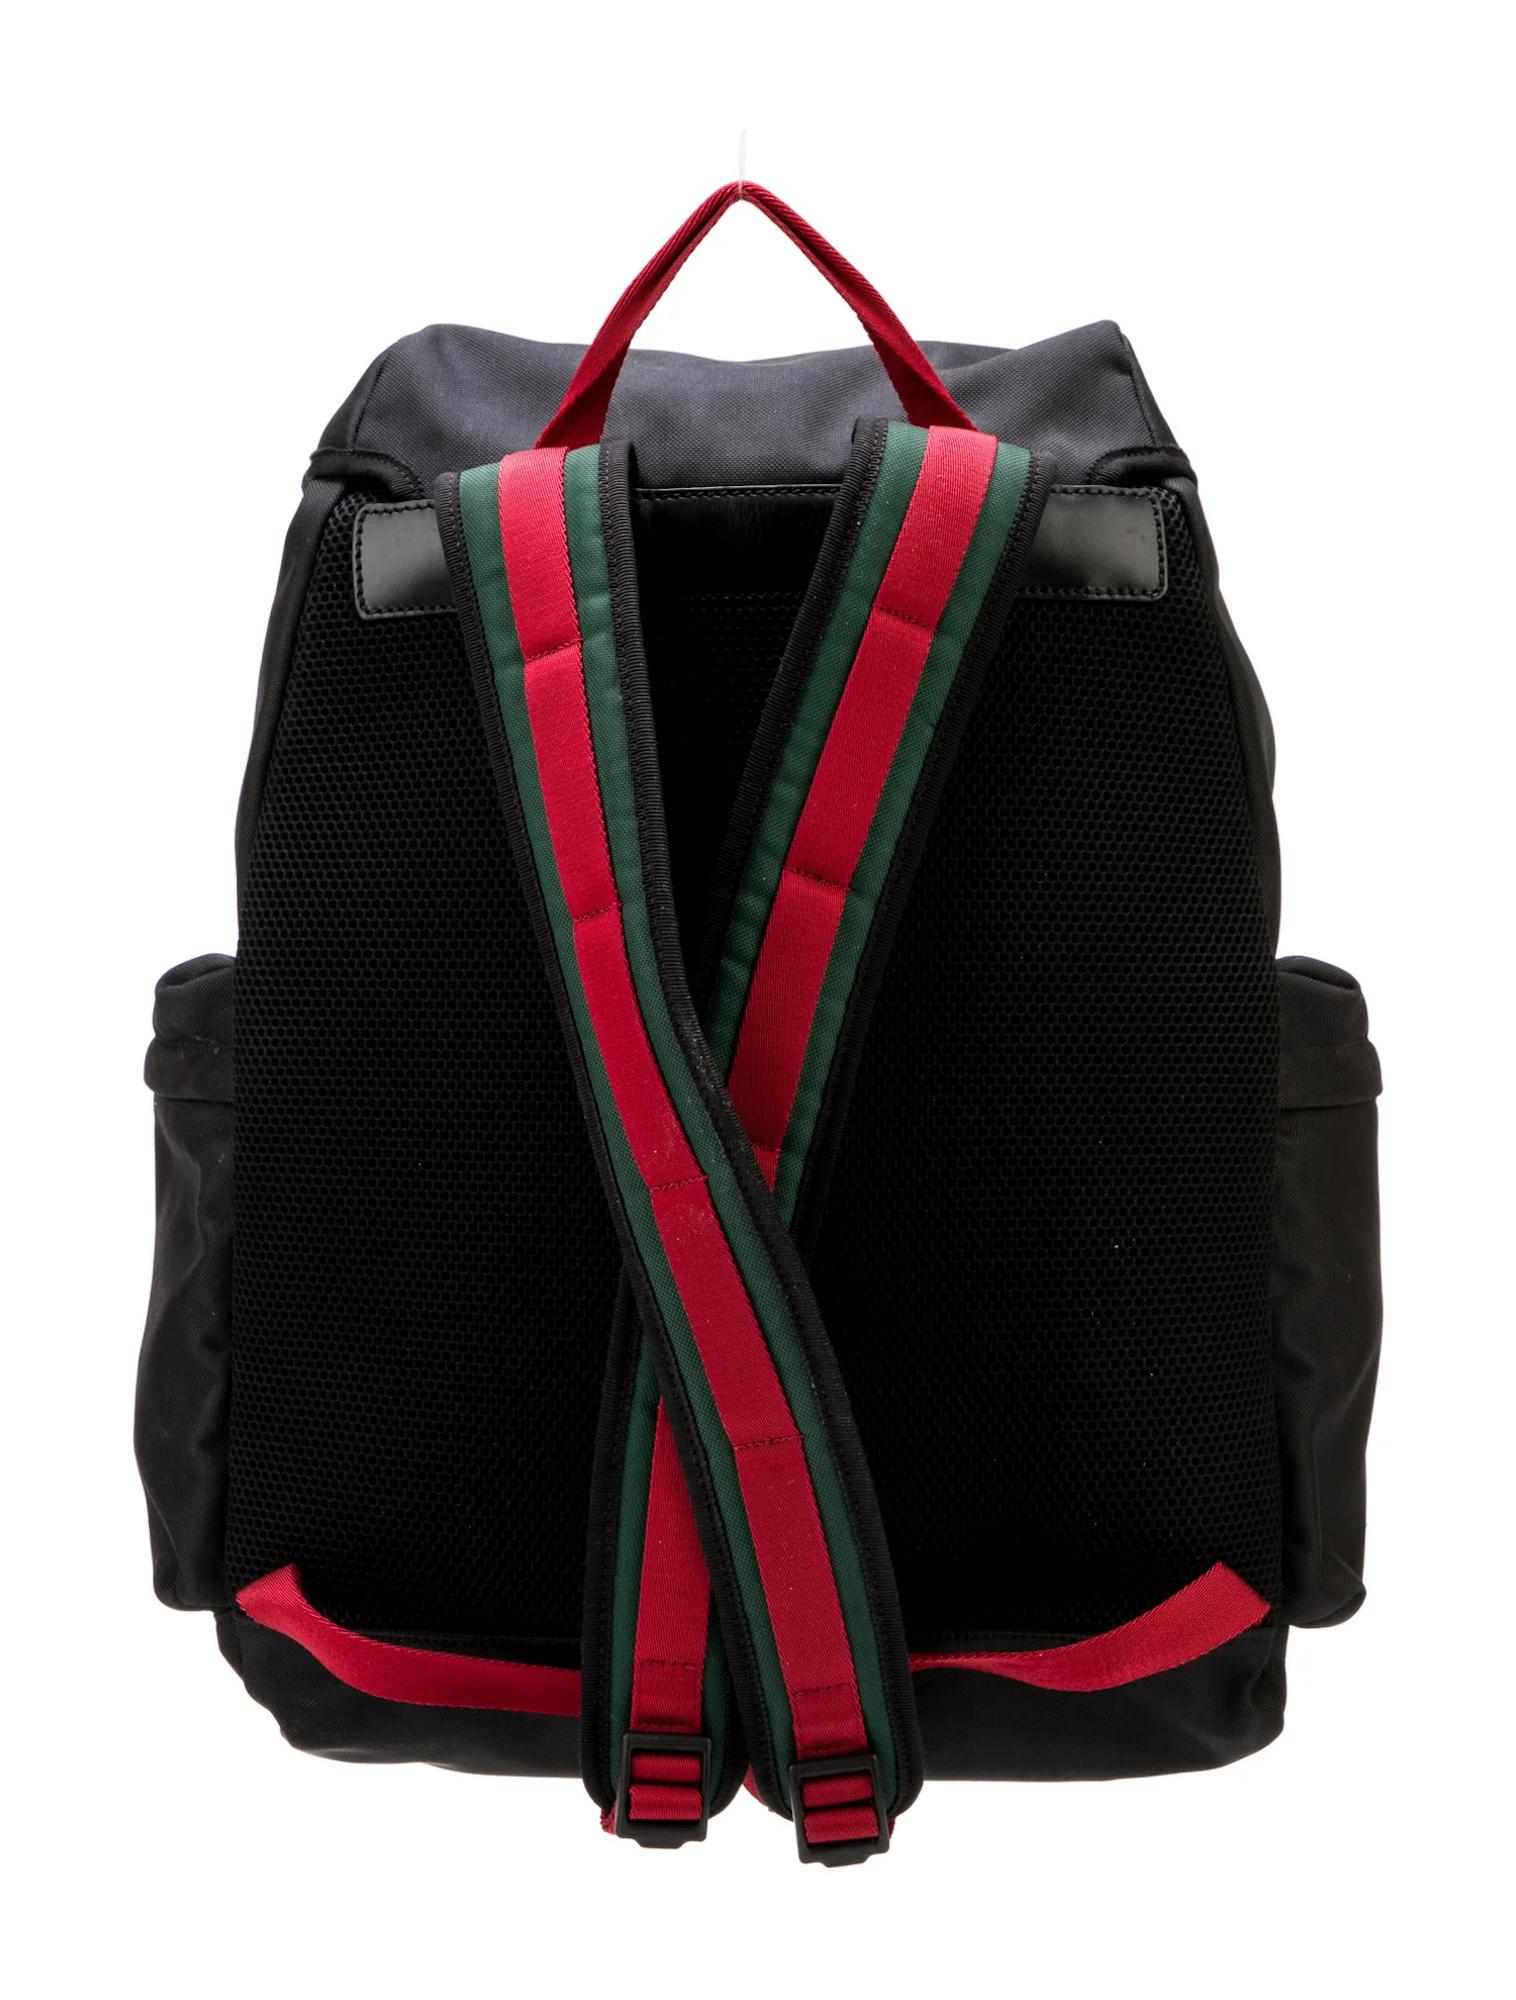 Gucci Nylon Black Web Detail Techno Backpack In Excellent Condition For Sale In Montreal, Quebec